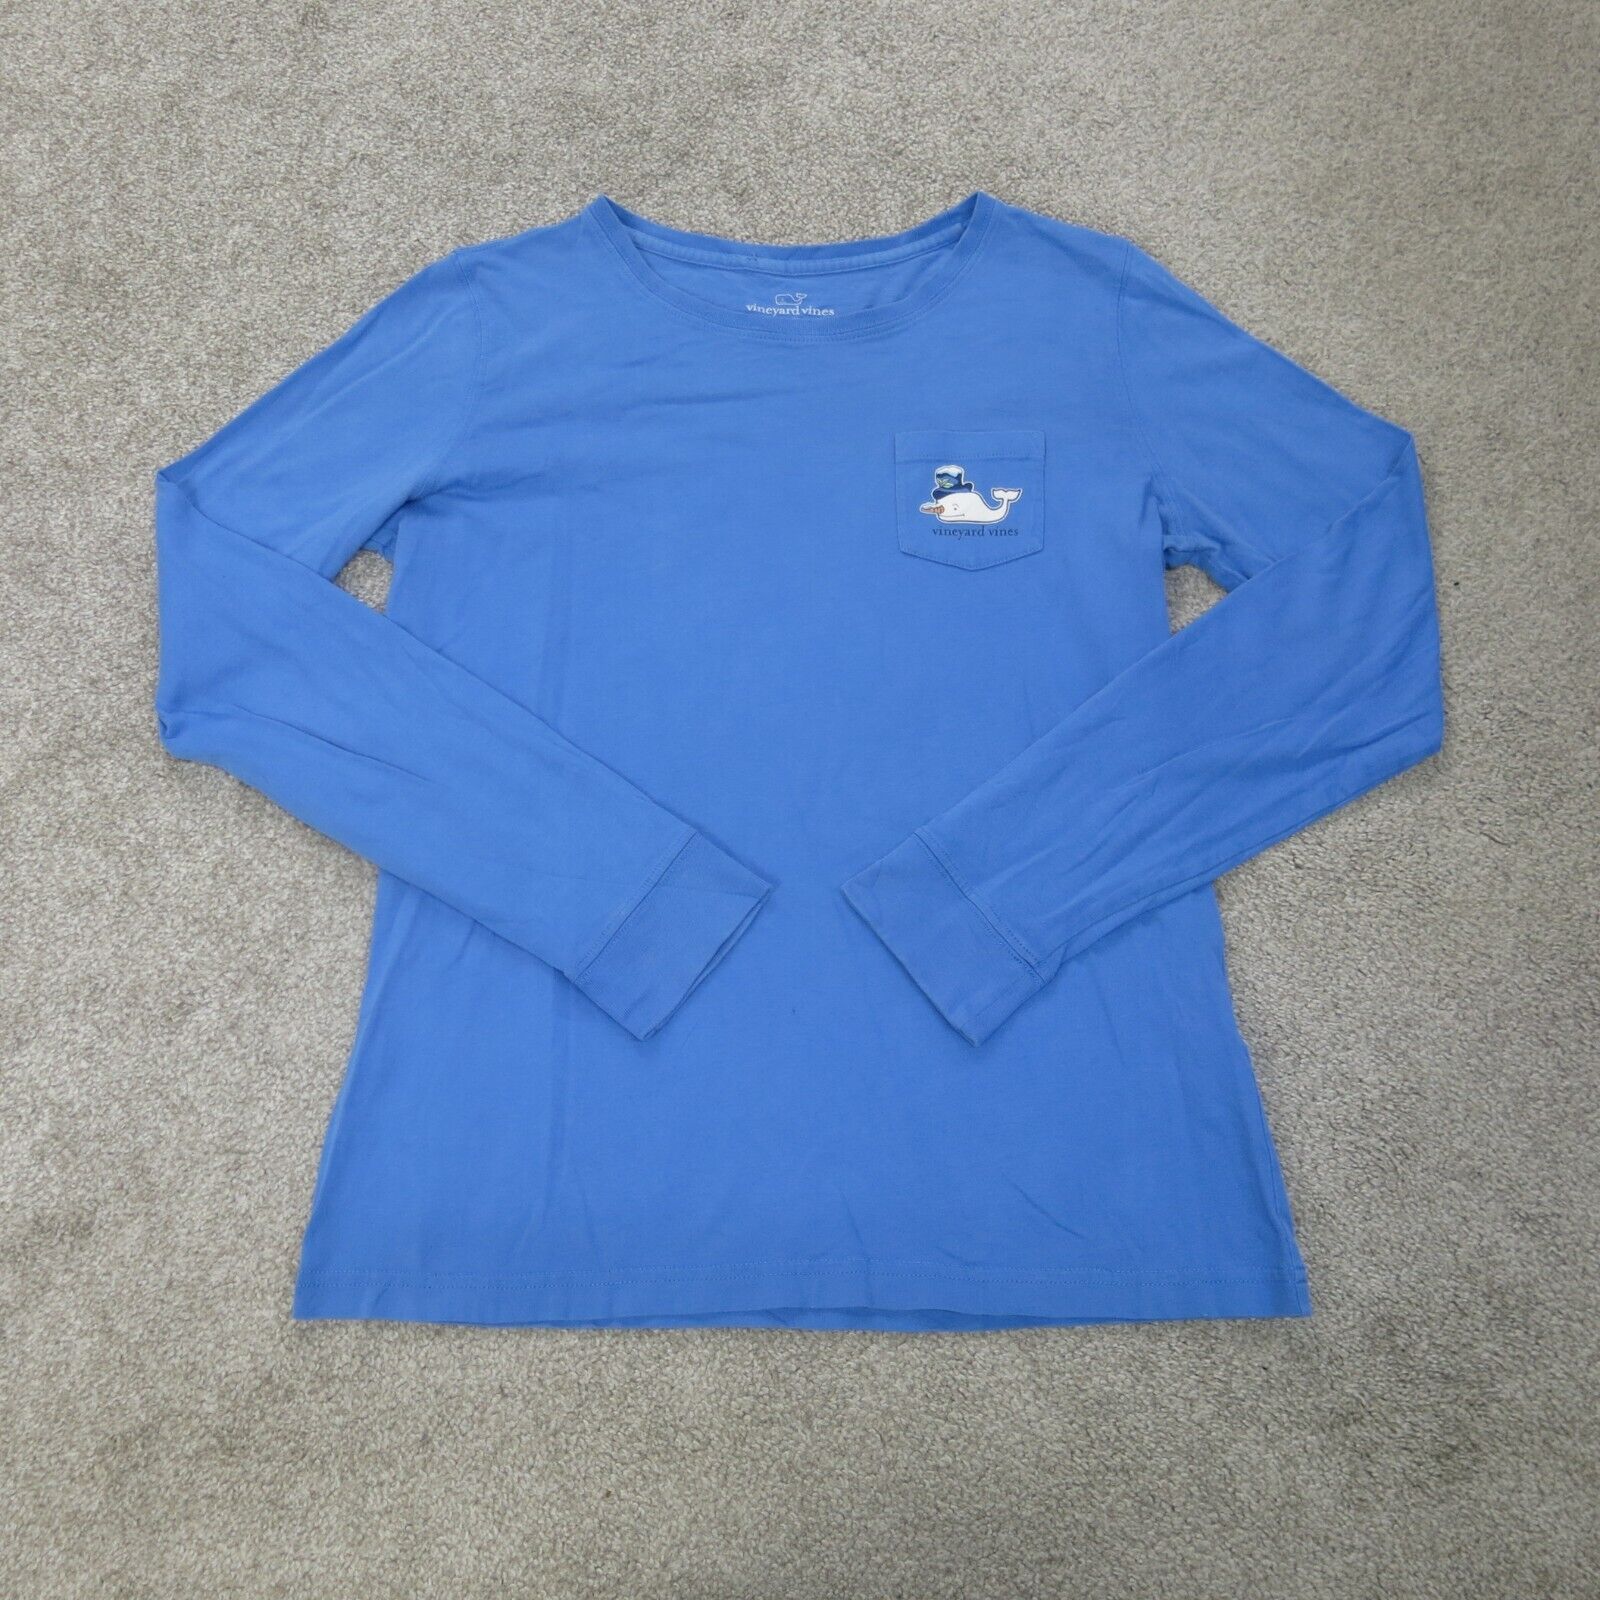 Vineyard Vines Shirt Mens Small Blue Crew Neck Pullover Graphic Tee 10